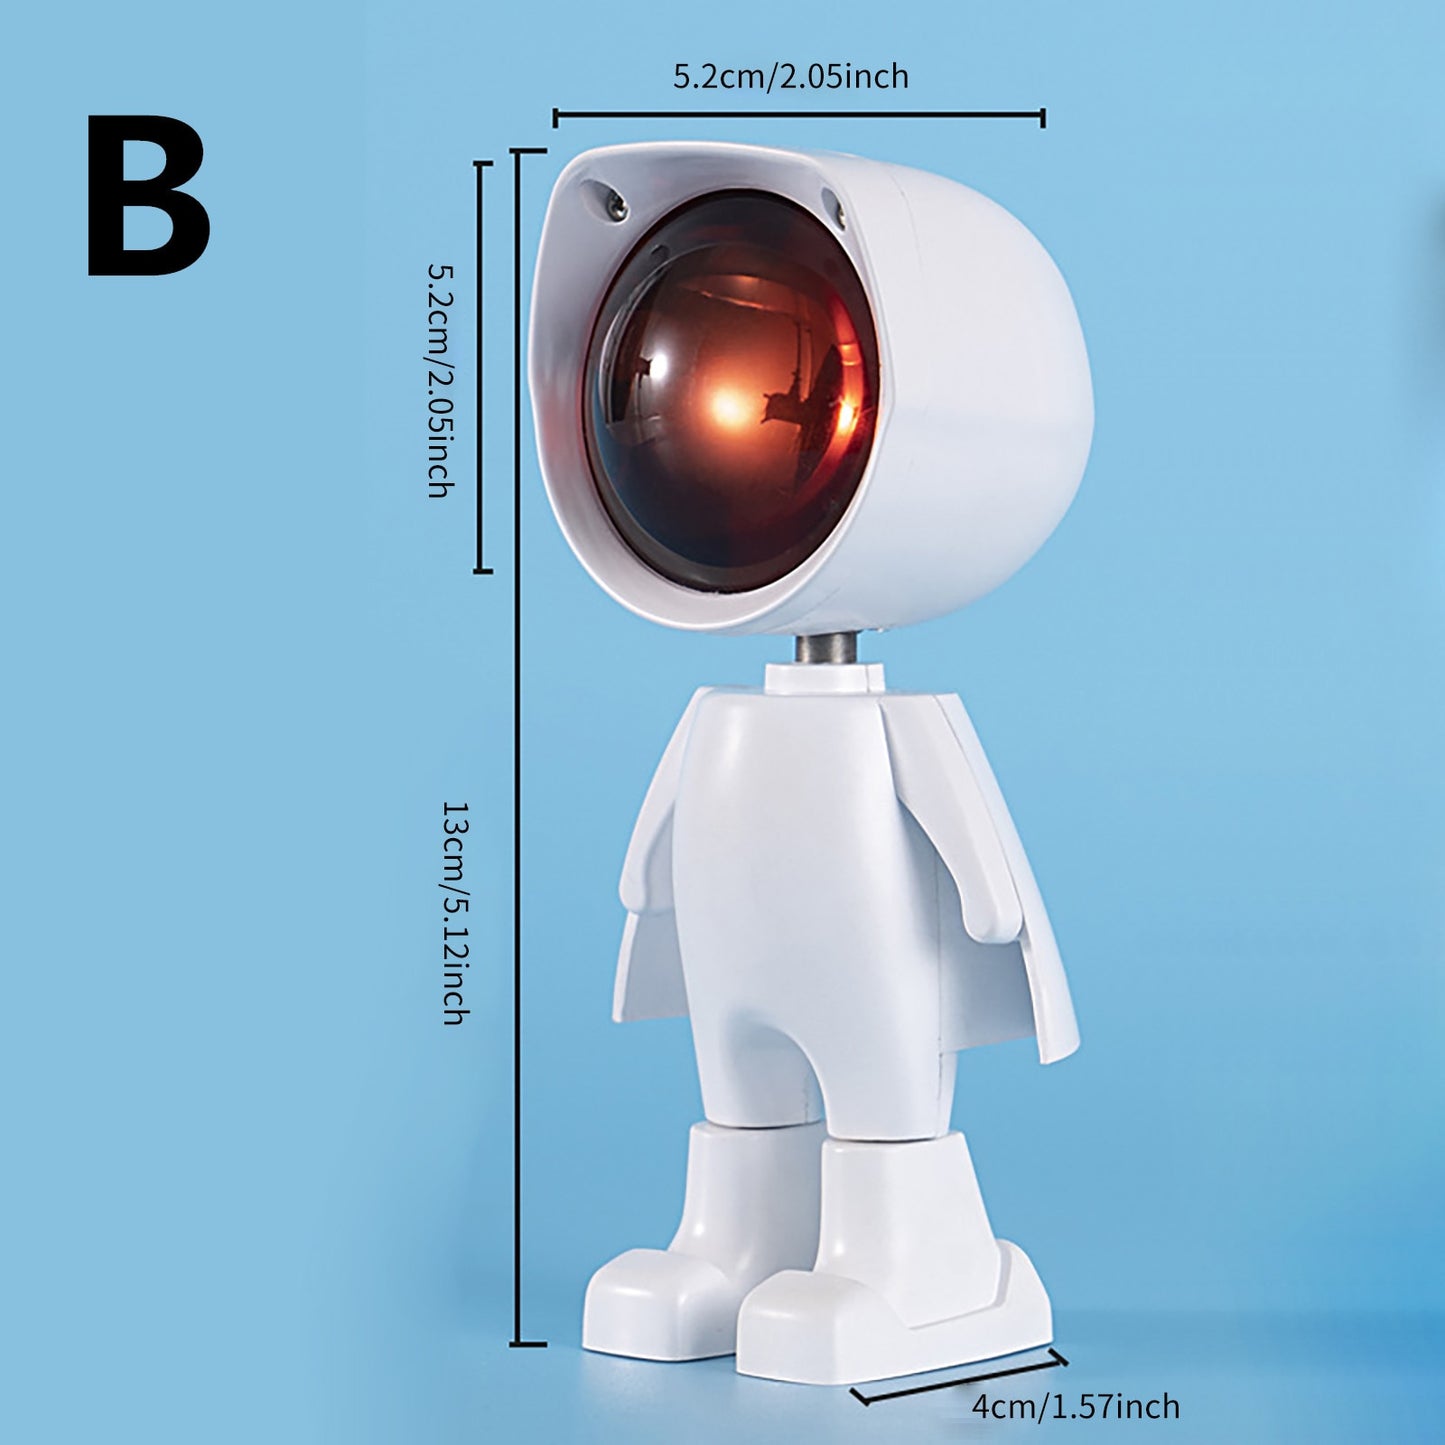 A playful lamp design resembling a robot or astronaut with dimensions labeled; it has a white body with a large, round head housing the light.